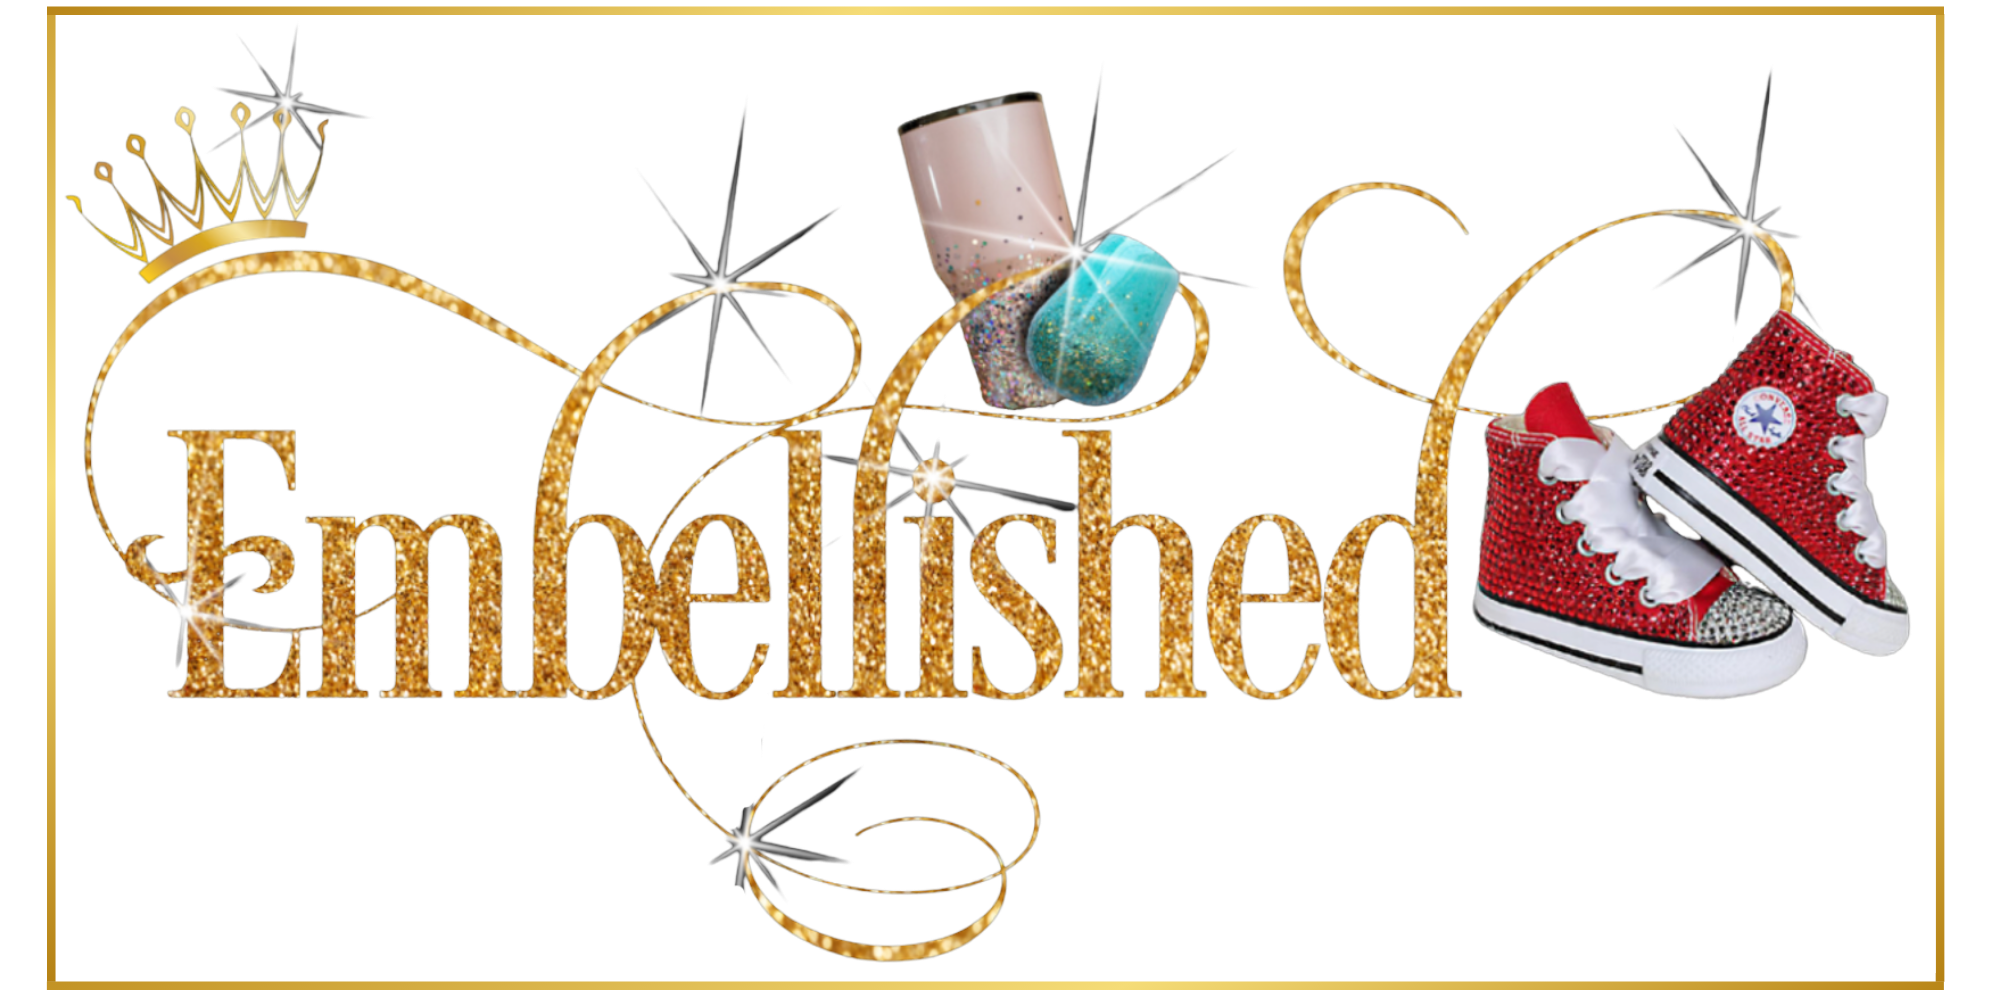 www.embellished.store